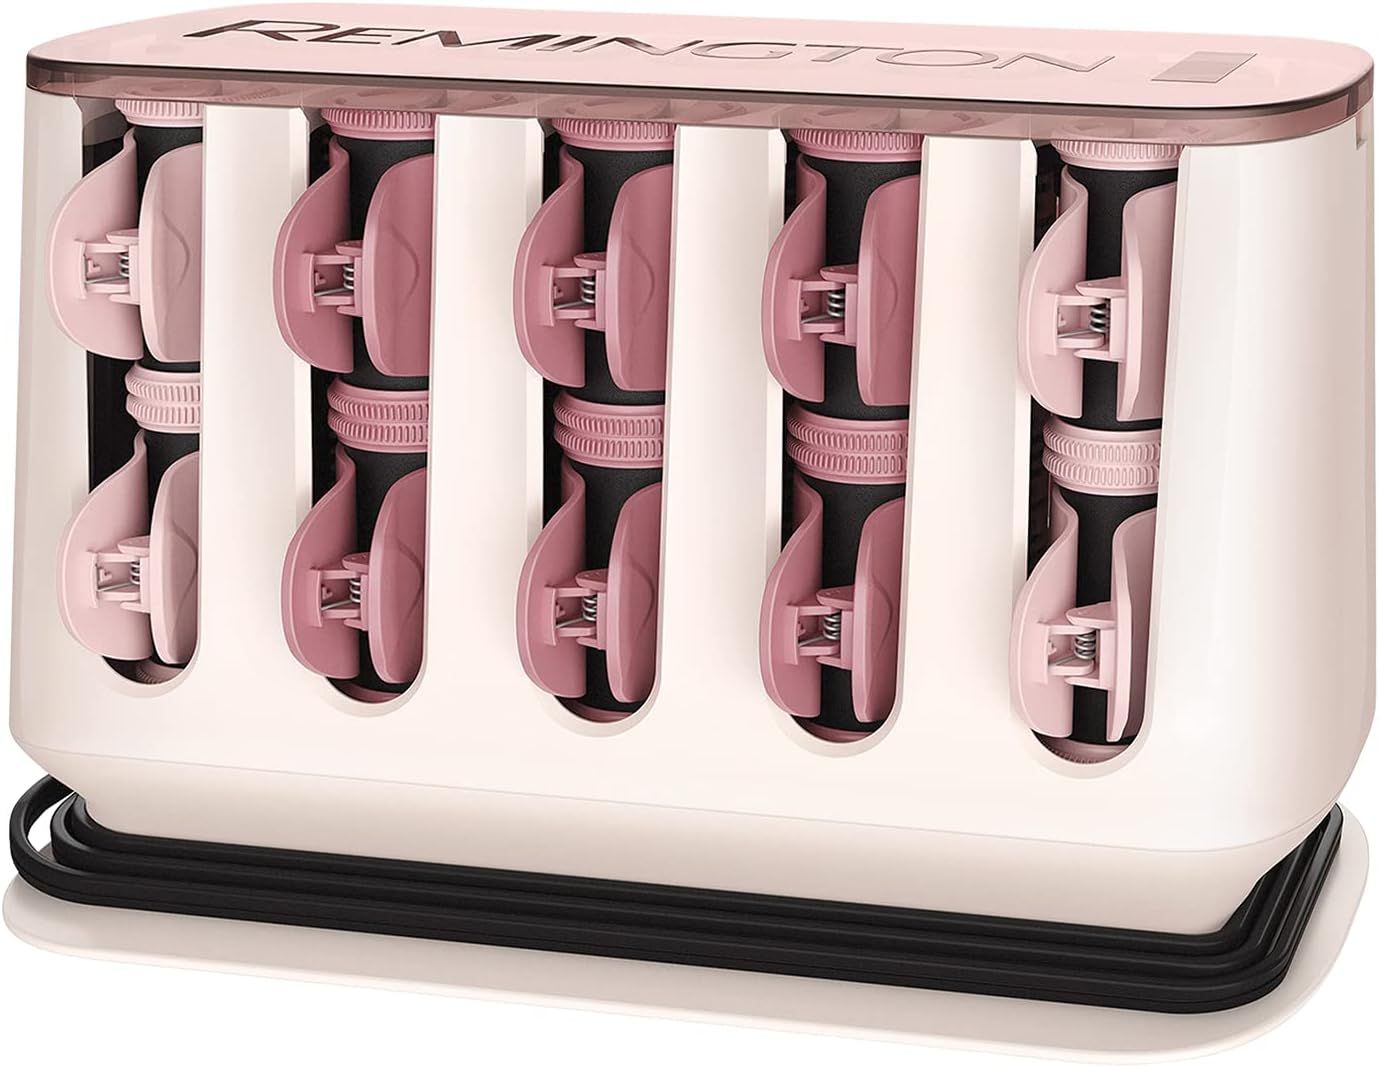 Remington H9100 Proluxe Heated Rollers - Rose Gold | Amazon (UK)